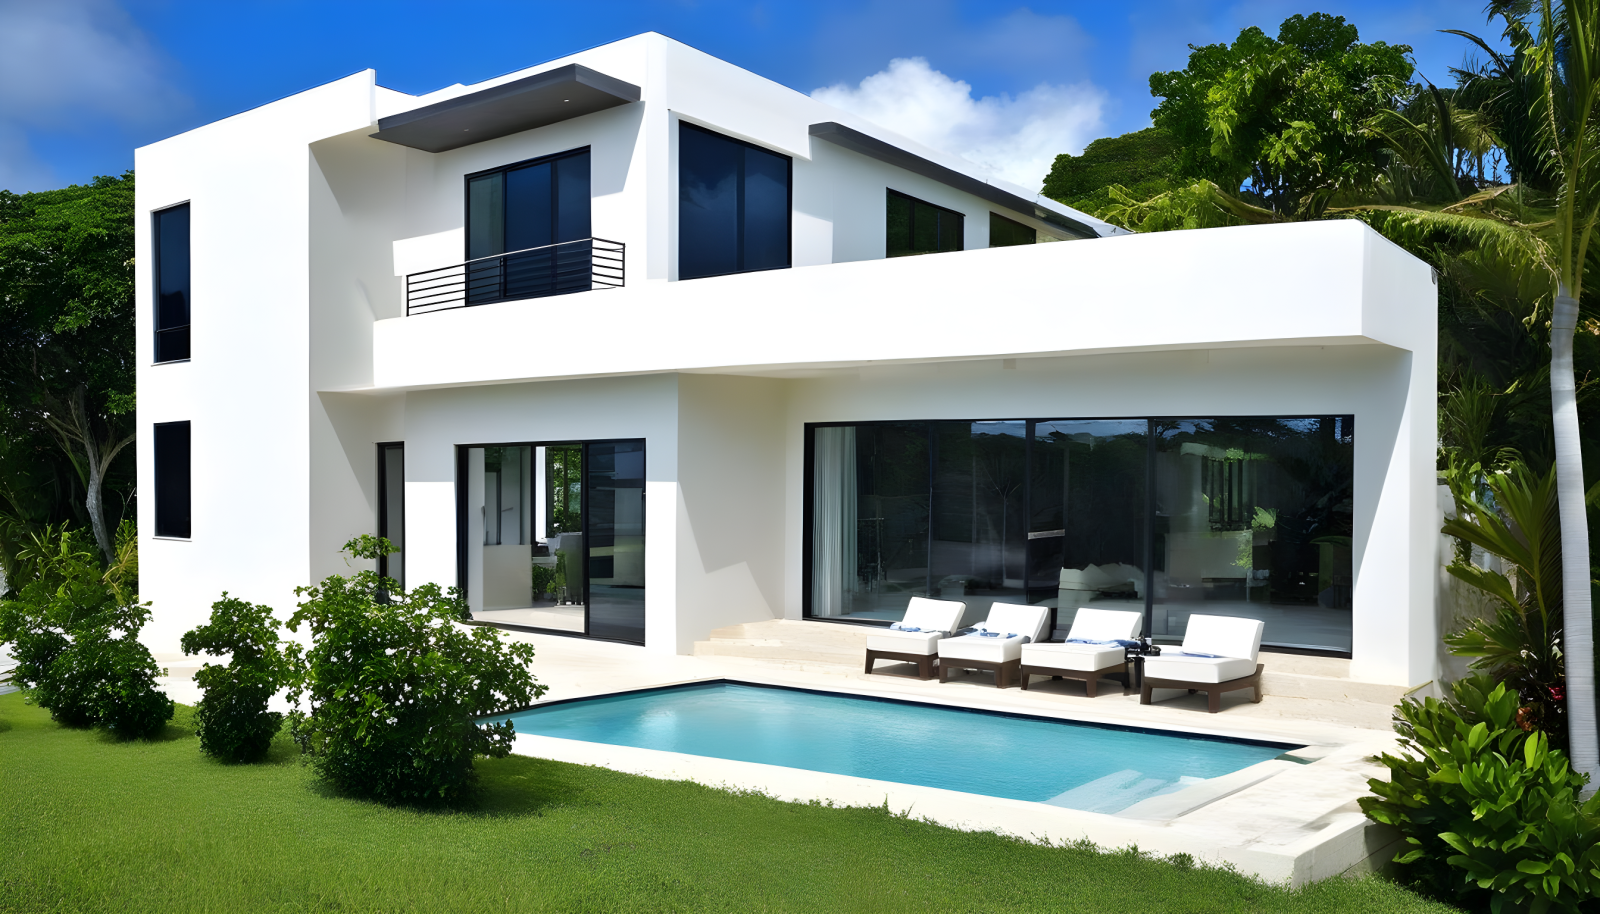 How is Prefab Houses in Barbados?